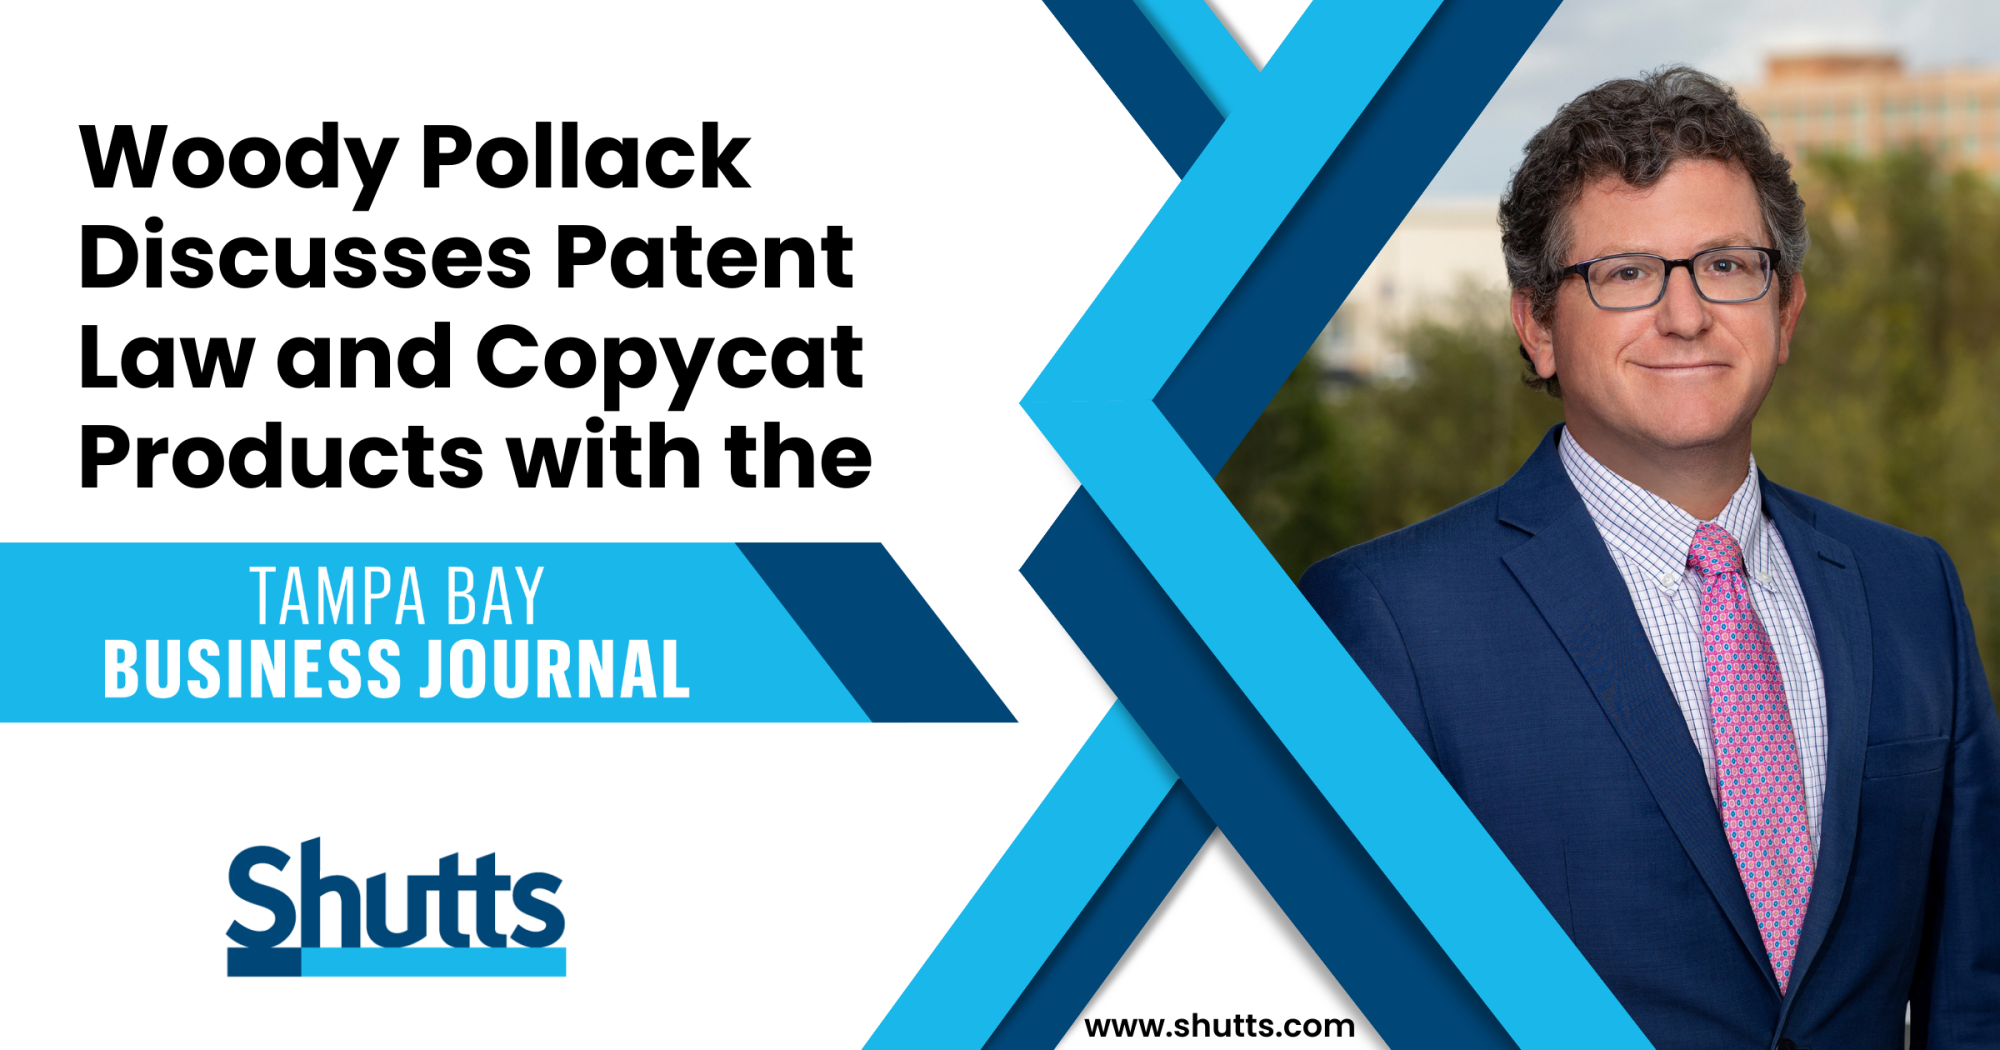 Woody Pollack Discusses Patent Law and Copycat Products with the TBBJ